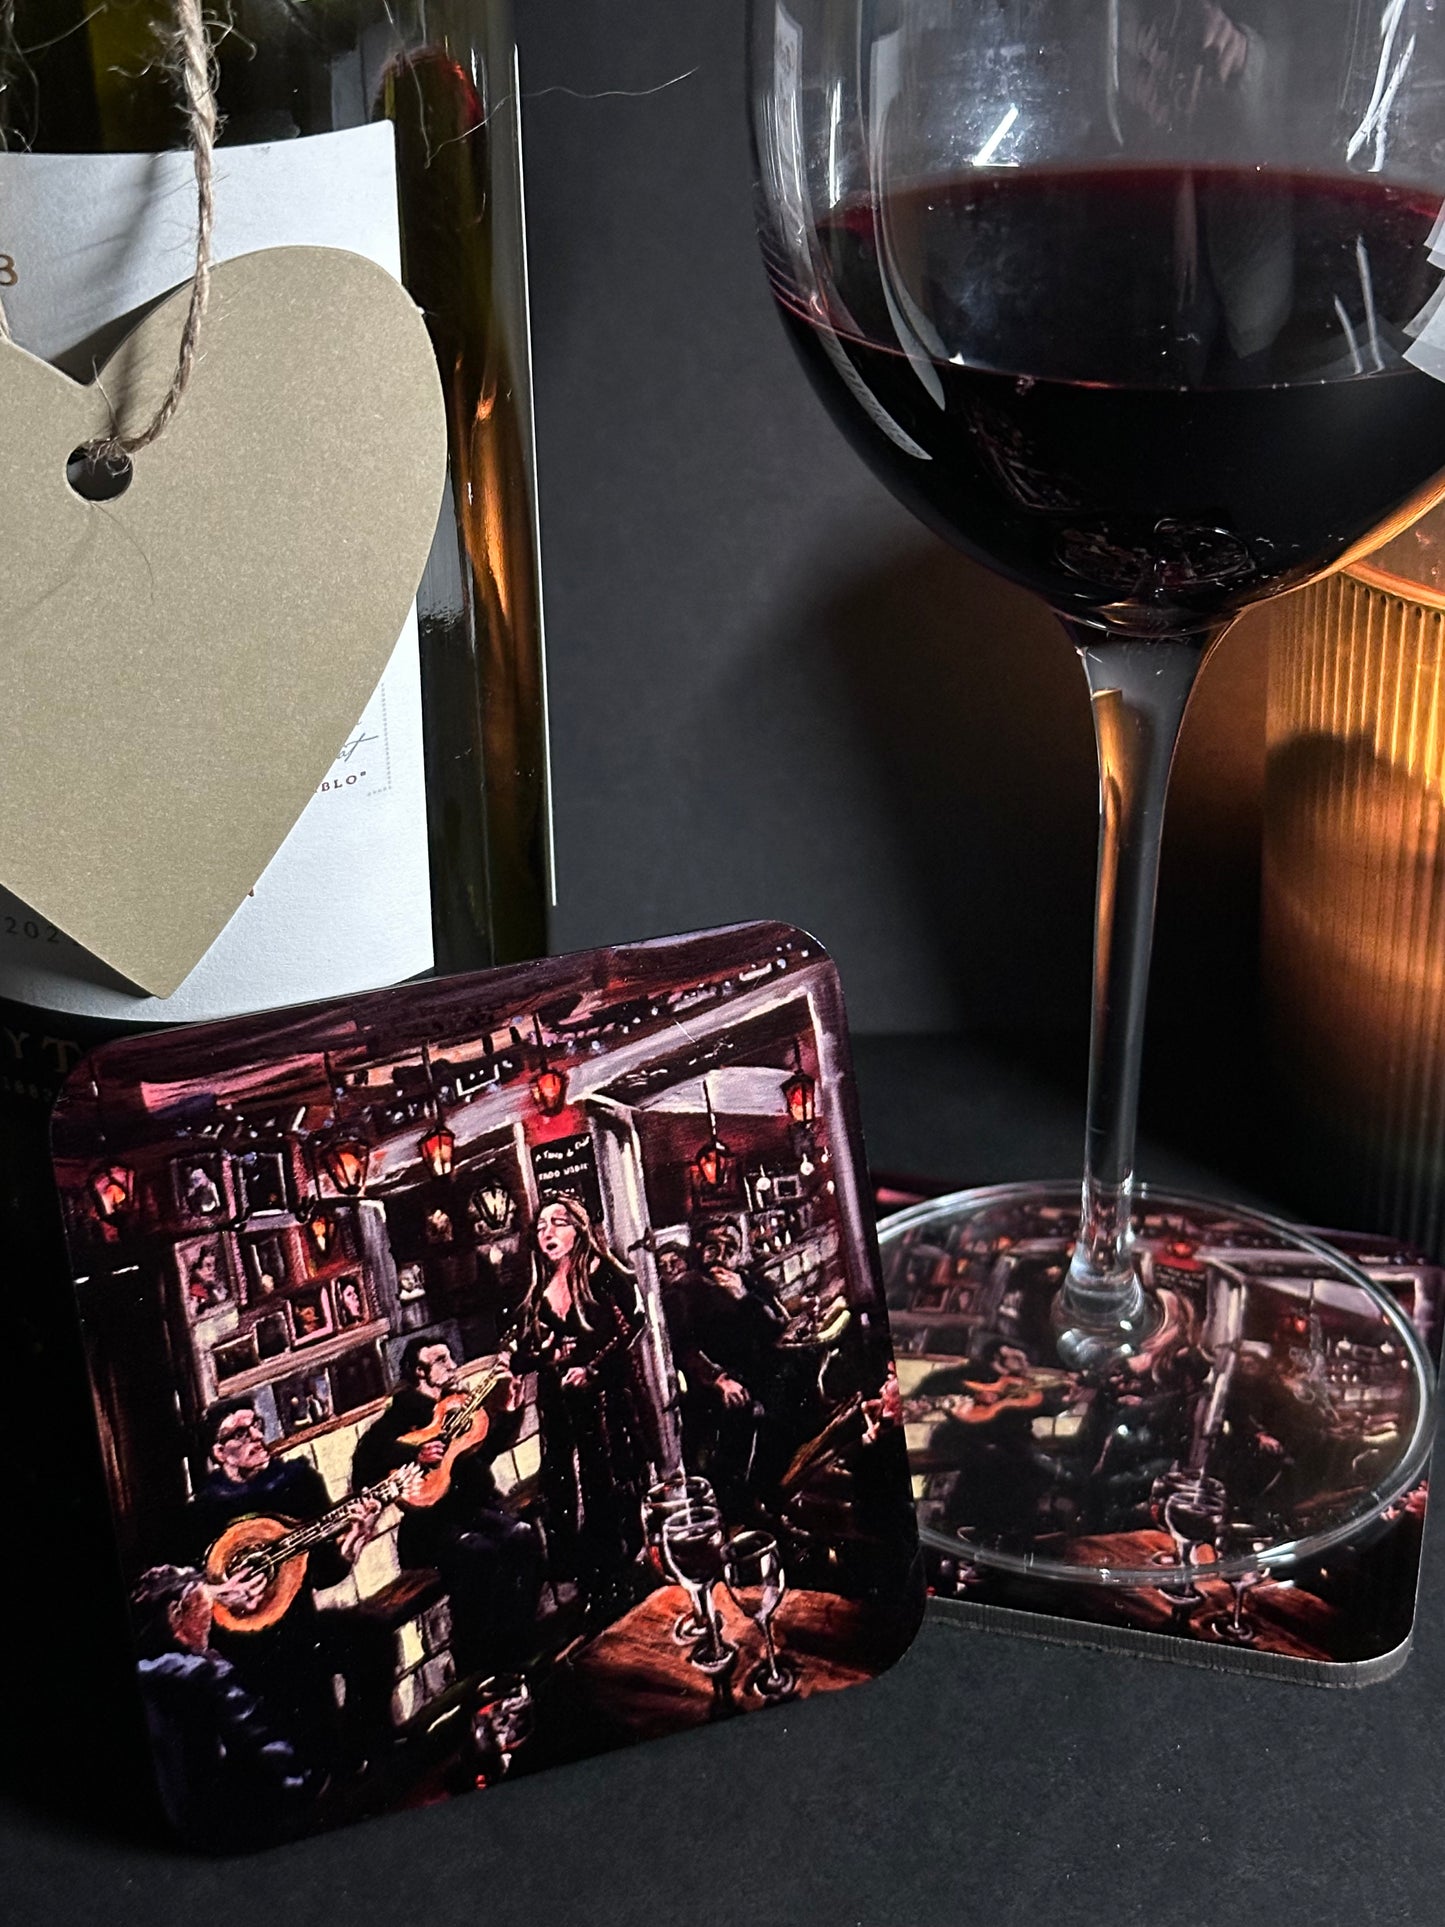 Fado Bar Lisbon coaster set in use candle light with wine glass rested on coaster and coaster detail upright to foreground